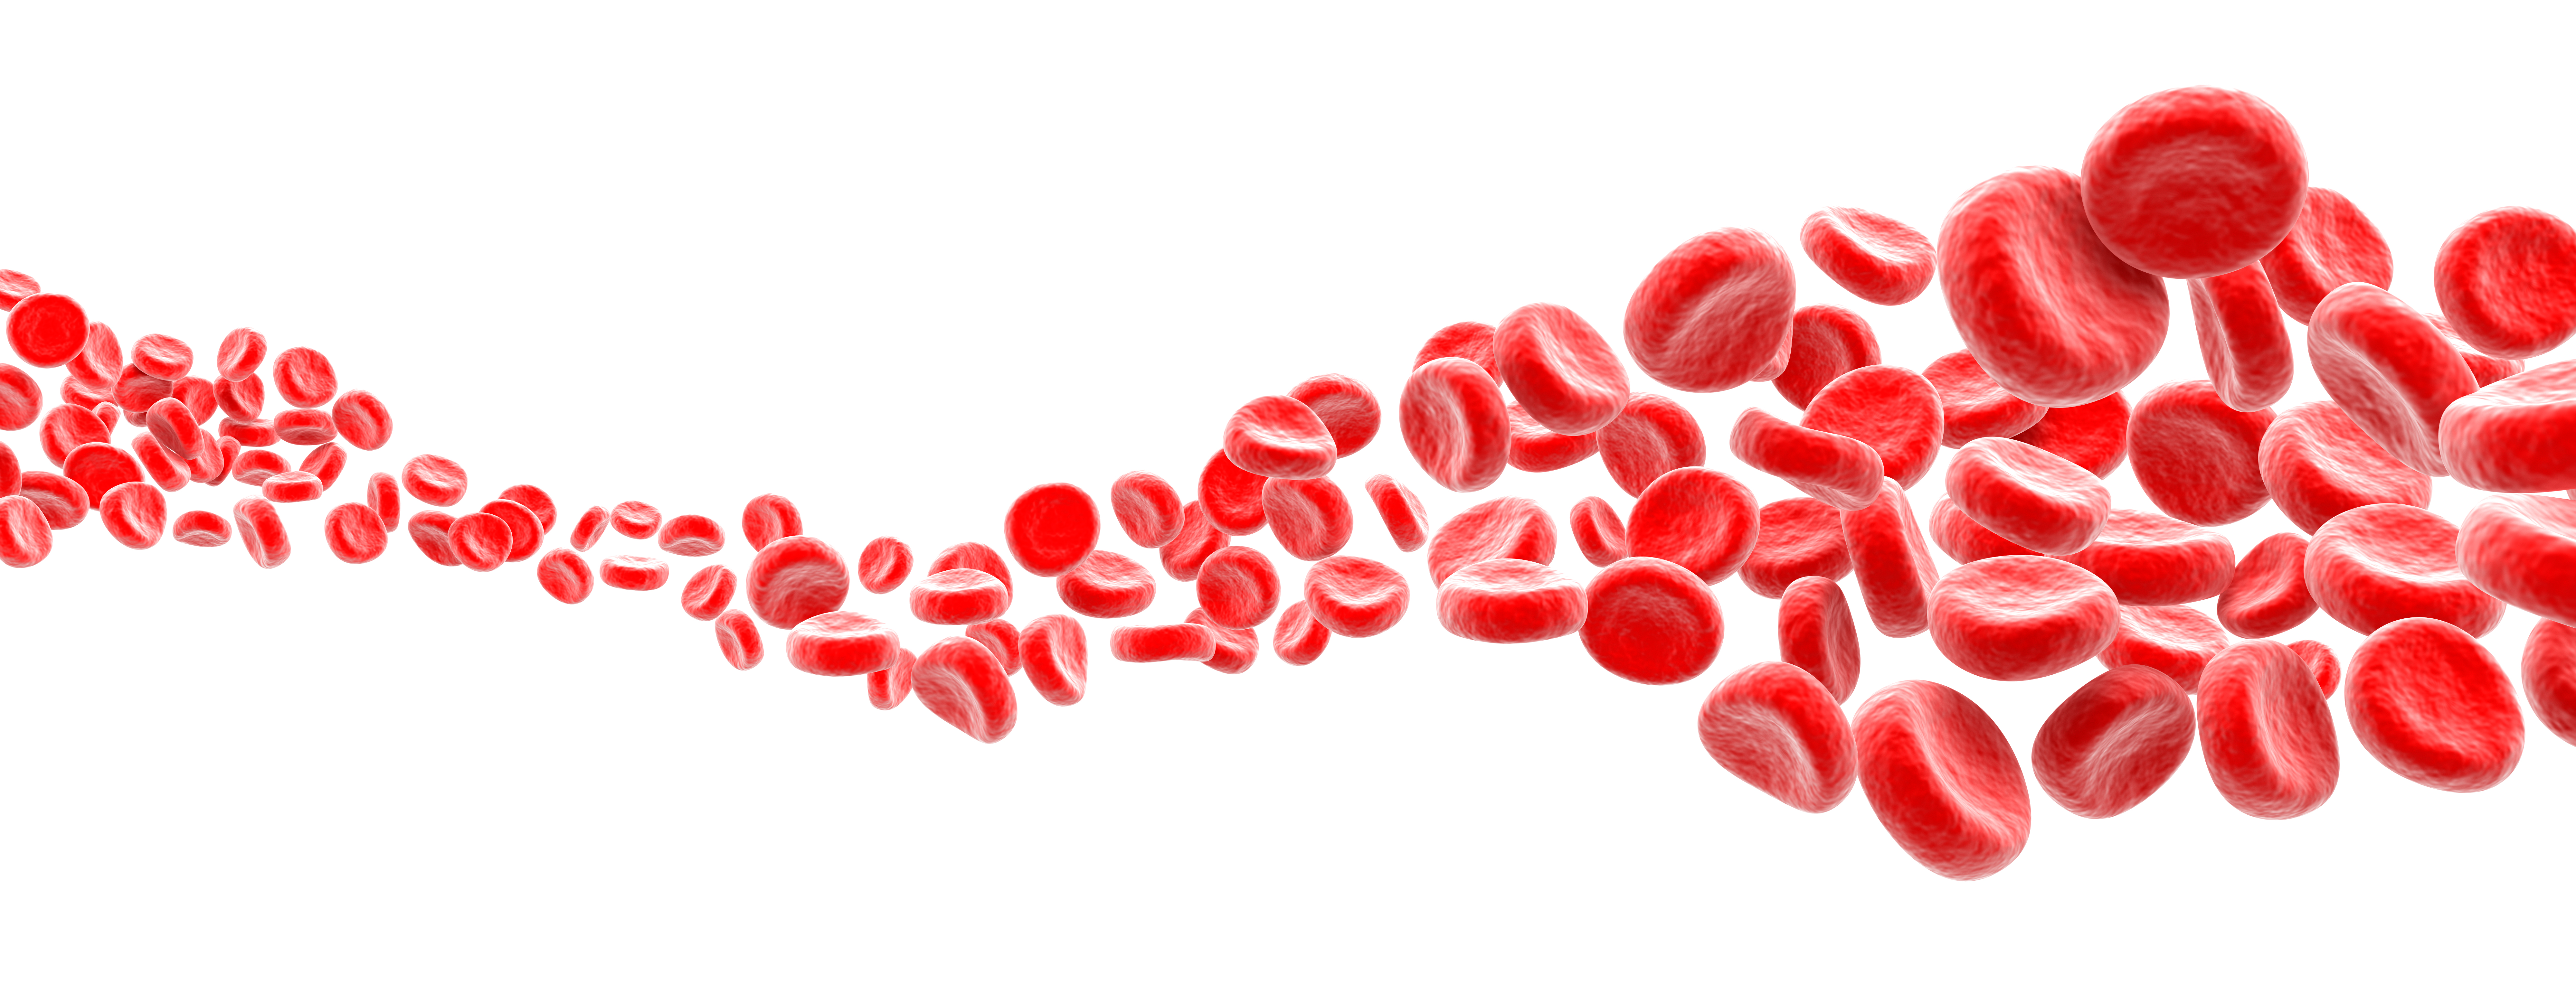 sickle cell research